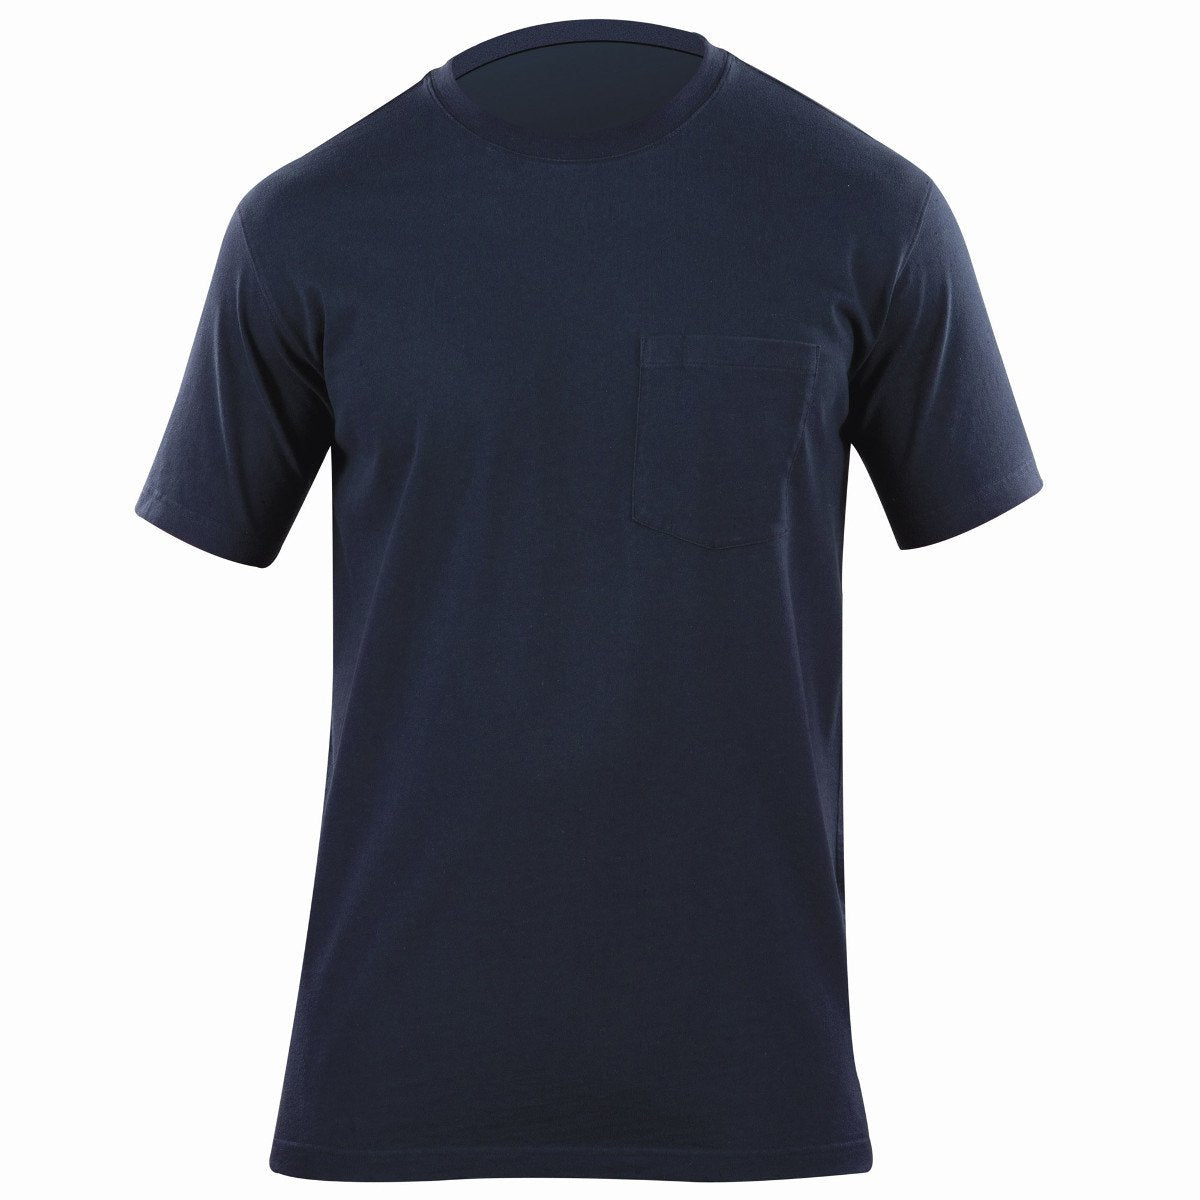 5.11 Professional Pocketed T-Shirt